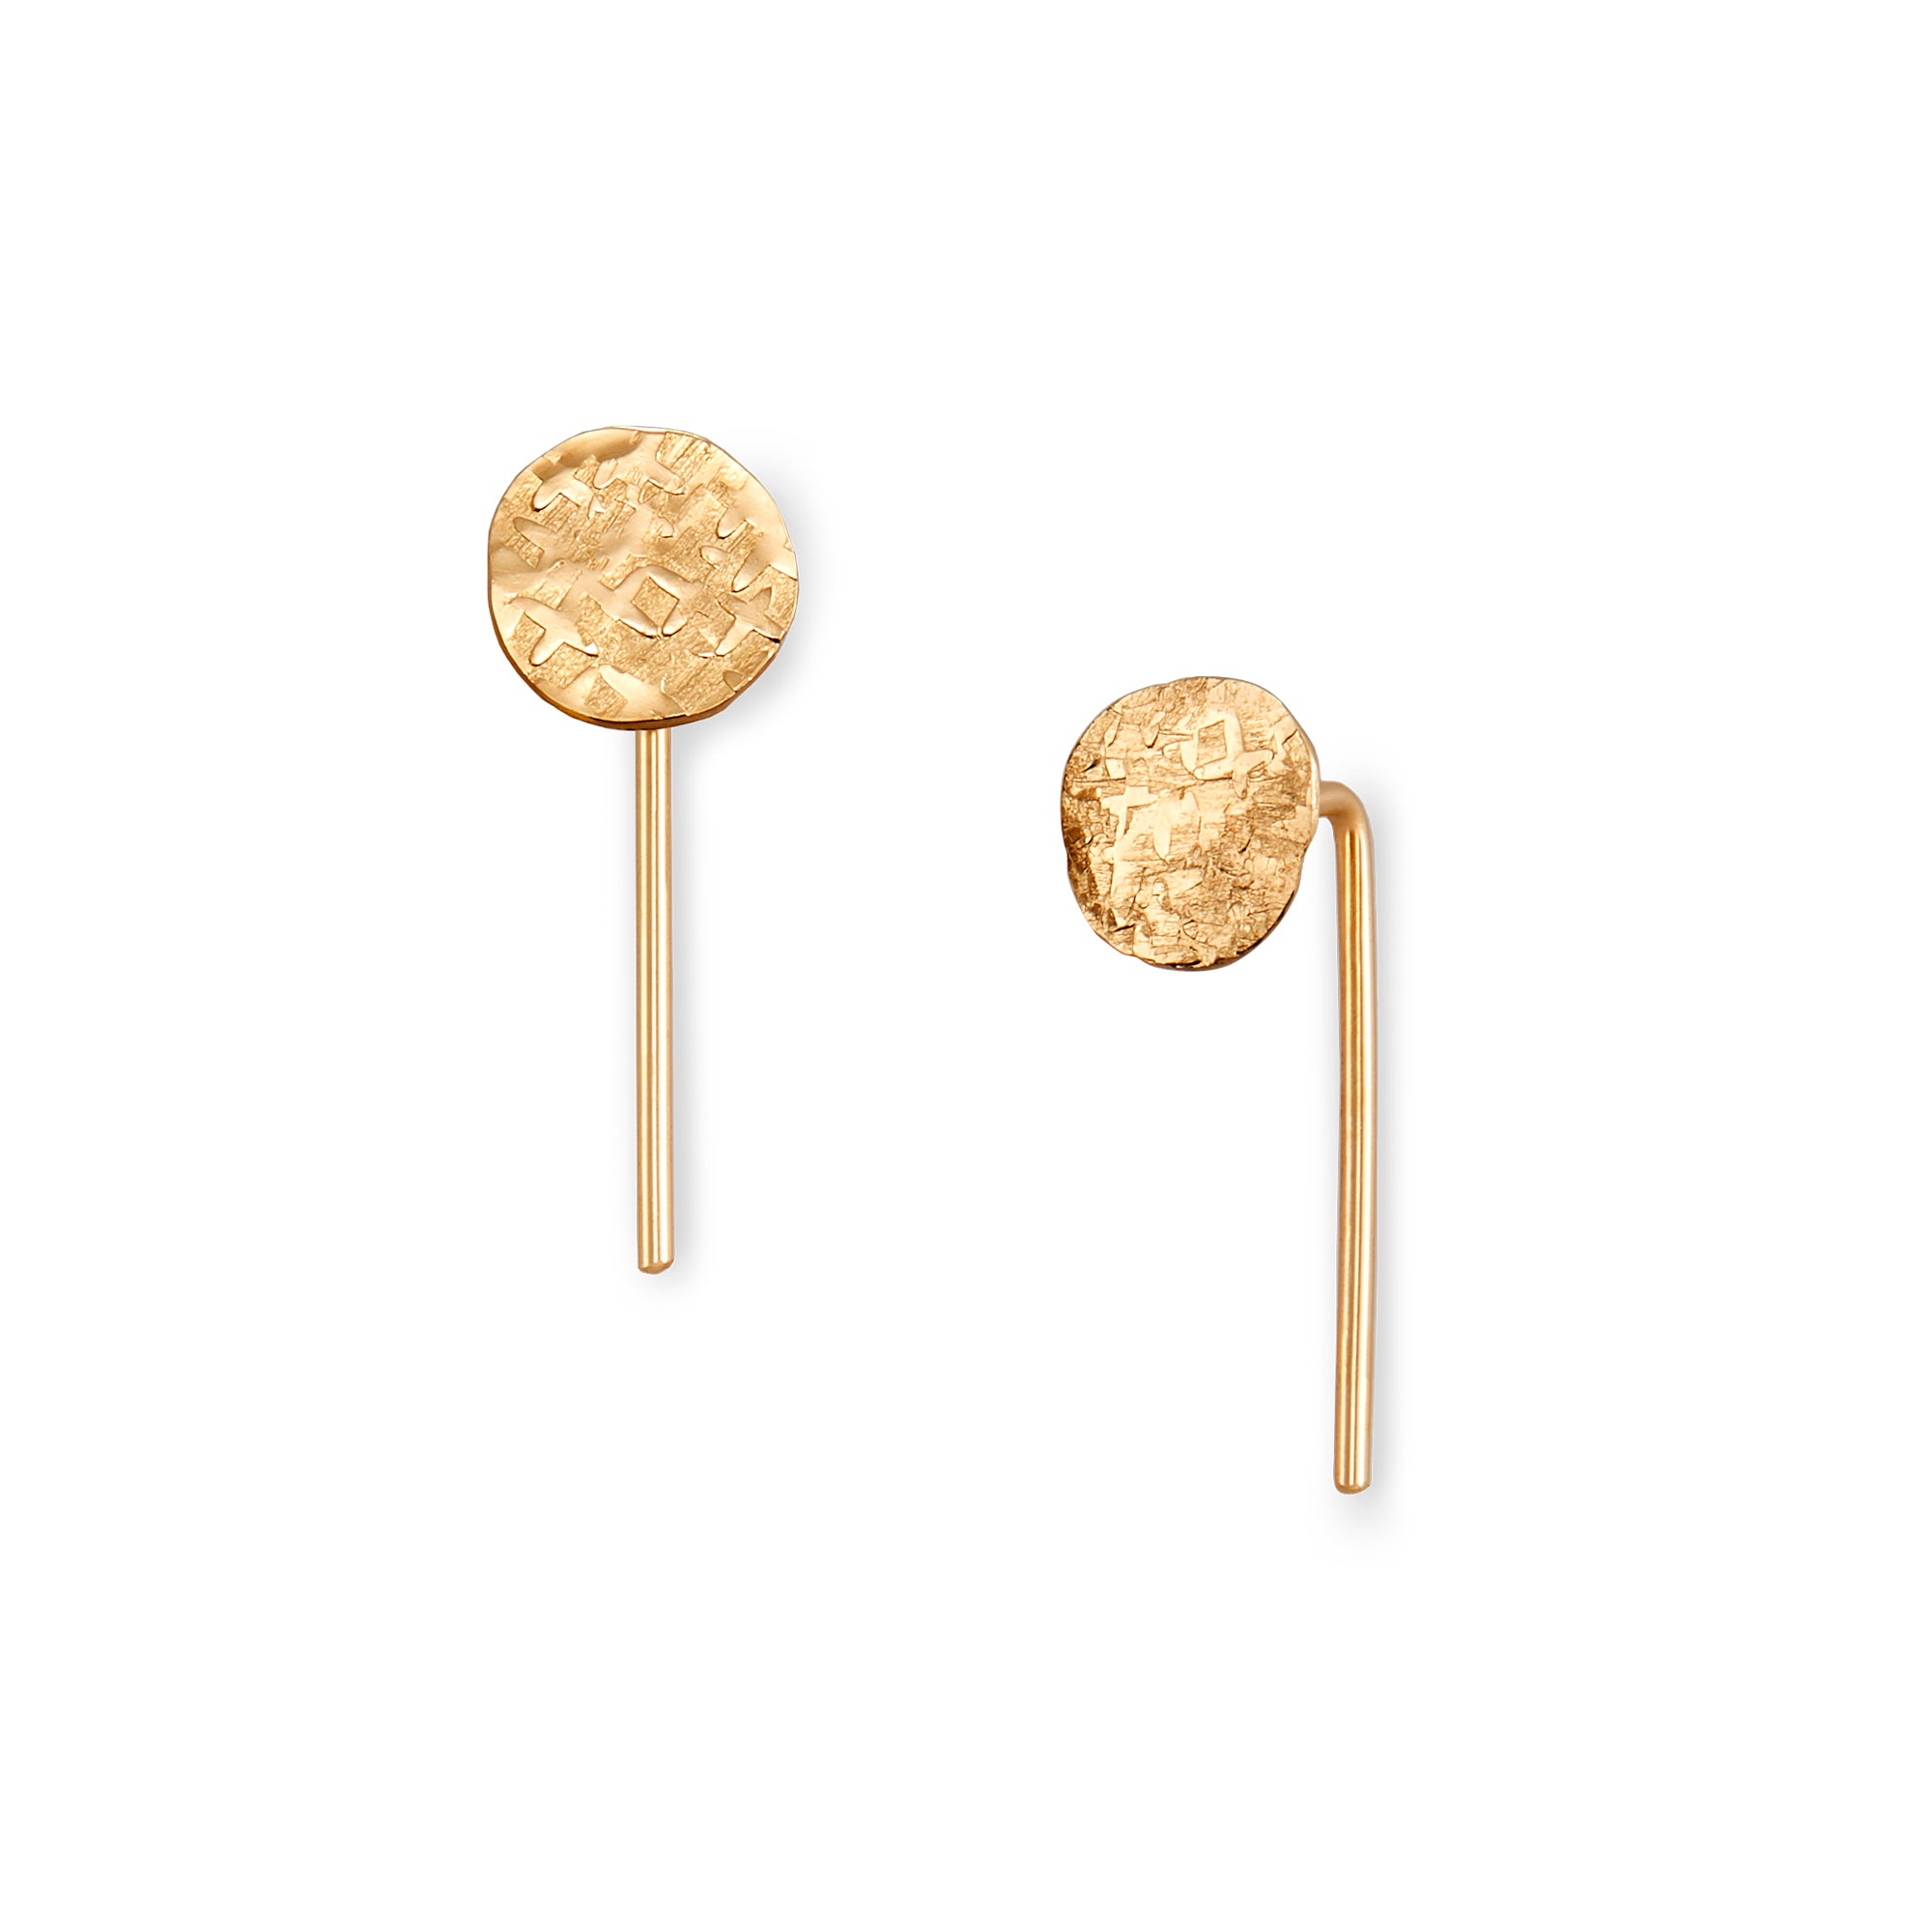 The Disc Hook, modern simplicity in 14k gold with your choice of classic hammered textured or nugget texture